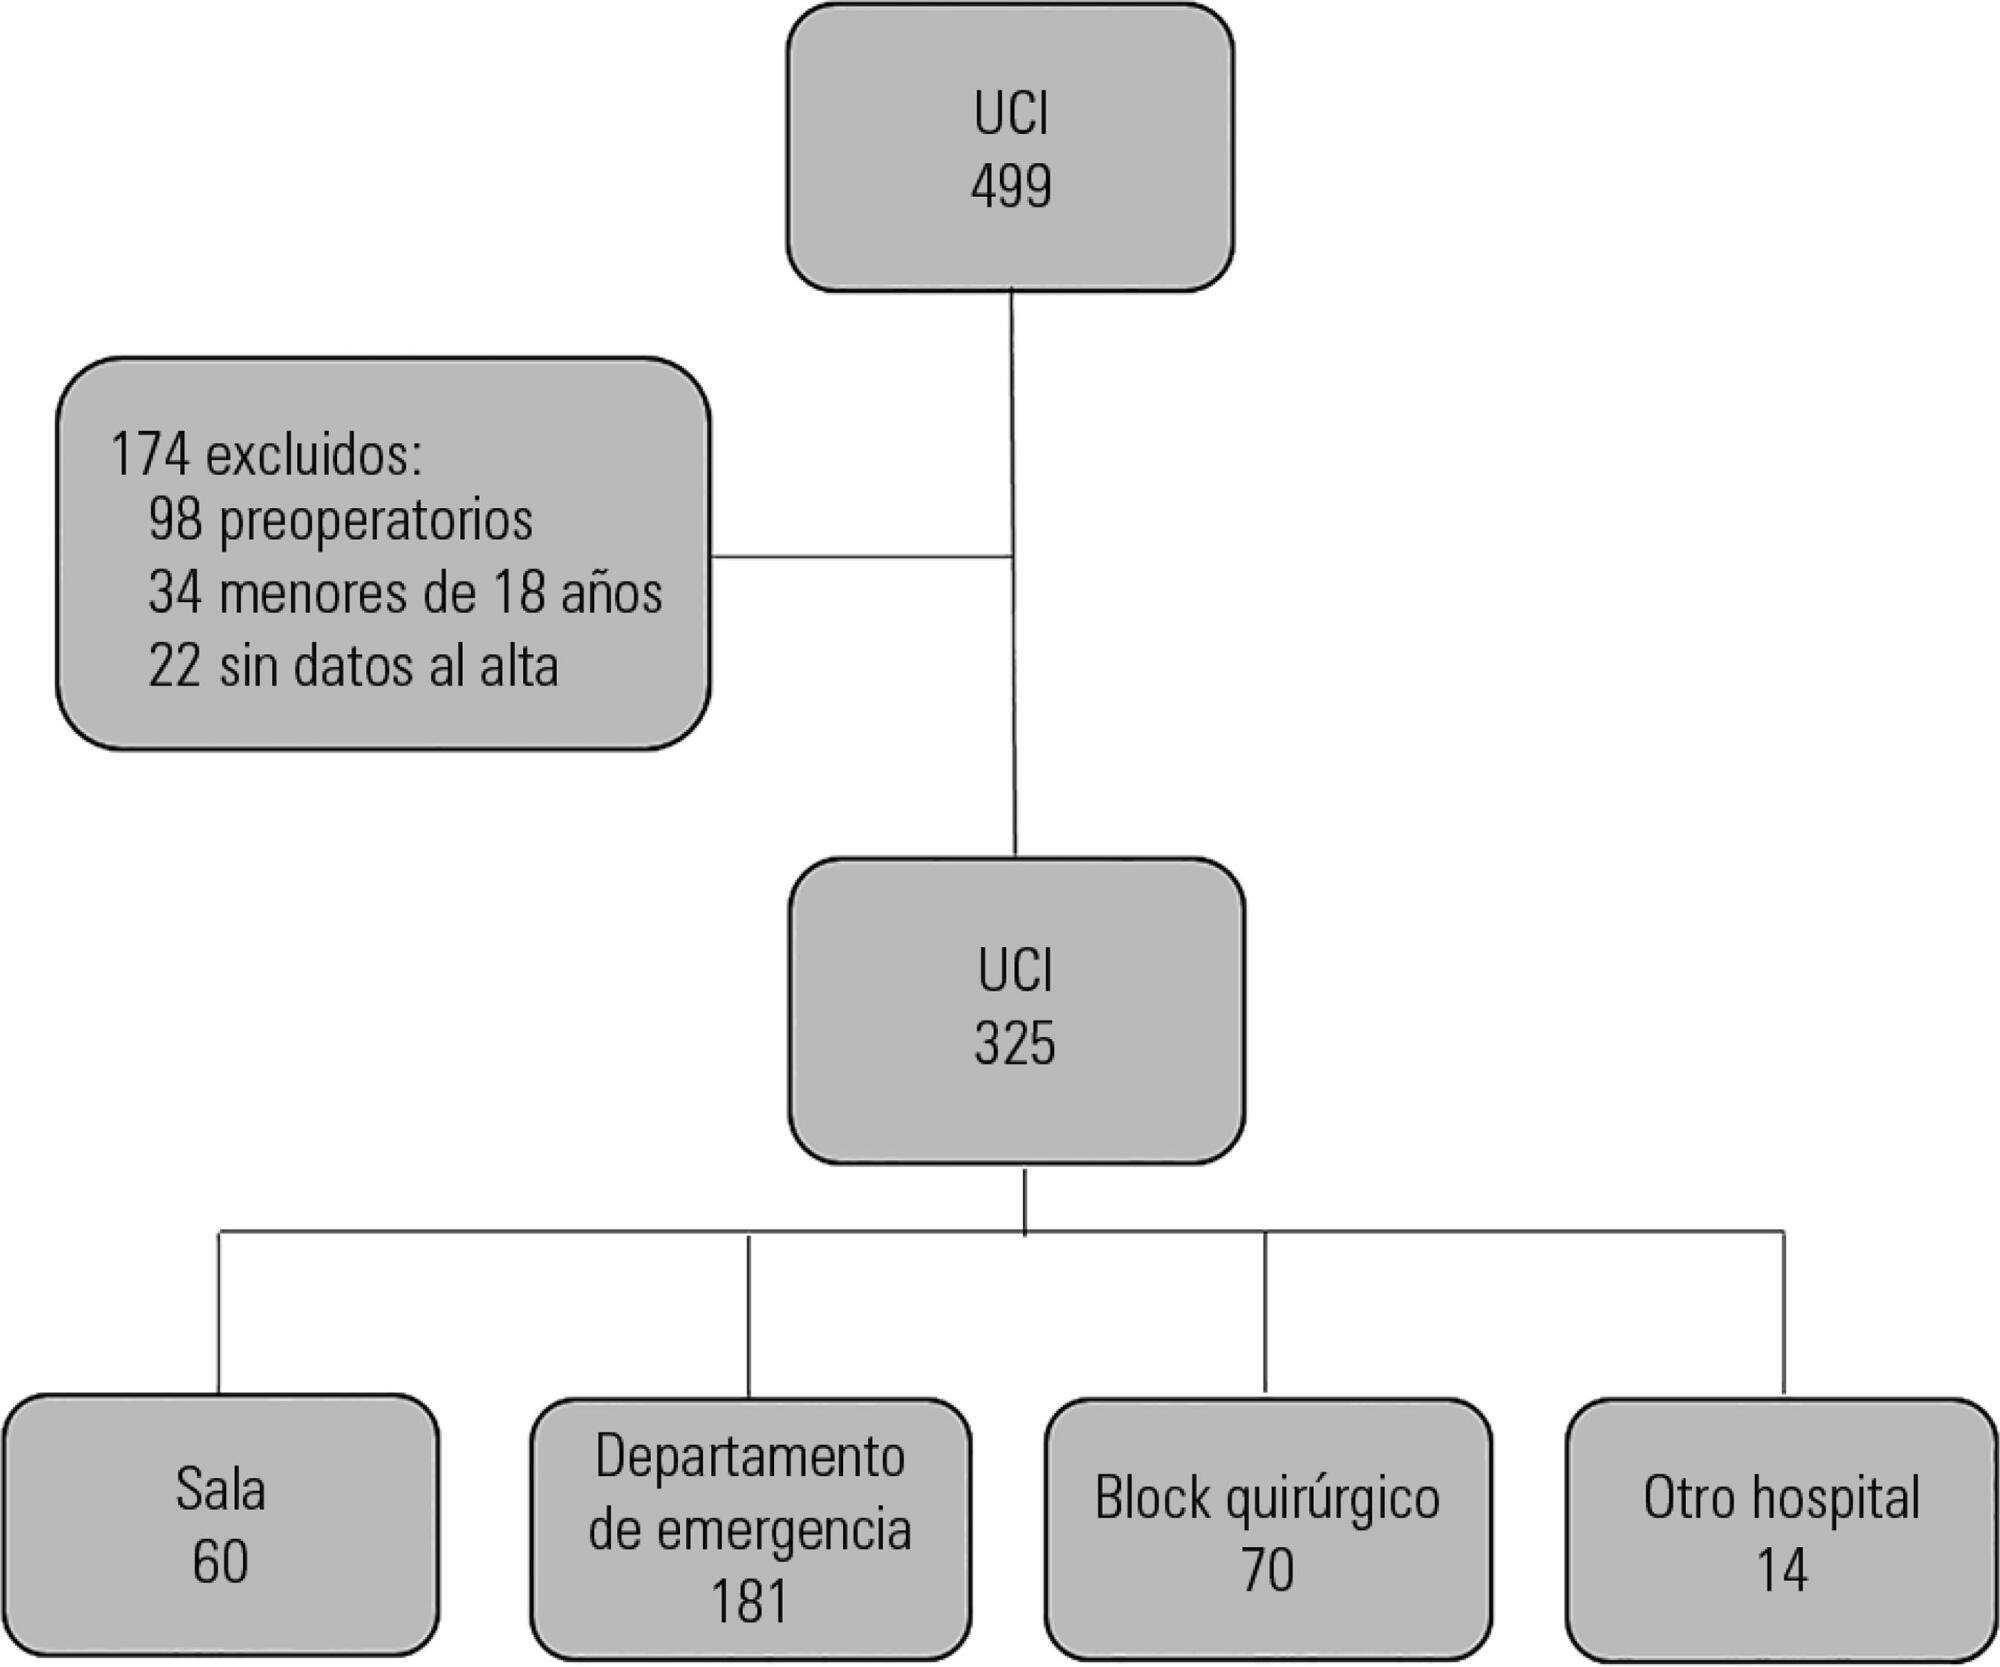 Prognostic impact of the time of admission and discharge from the intensive care unit